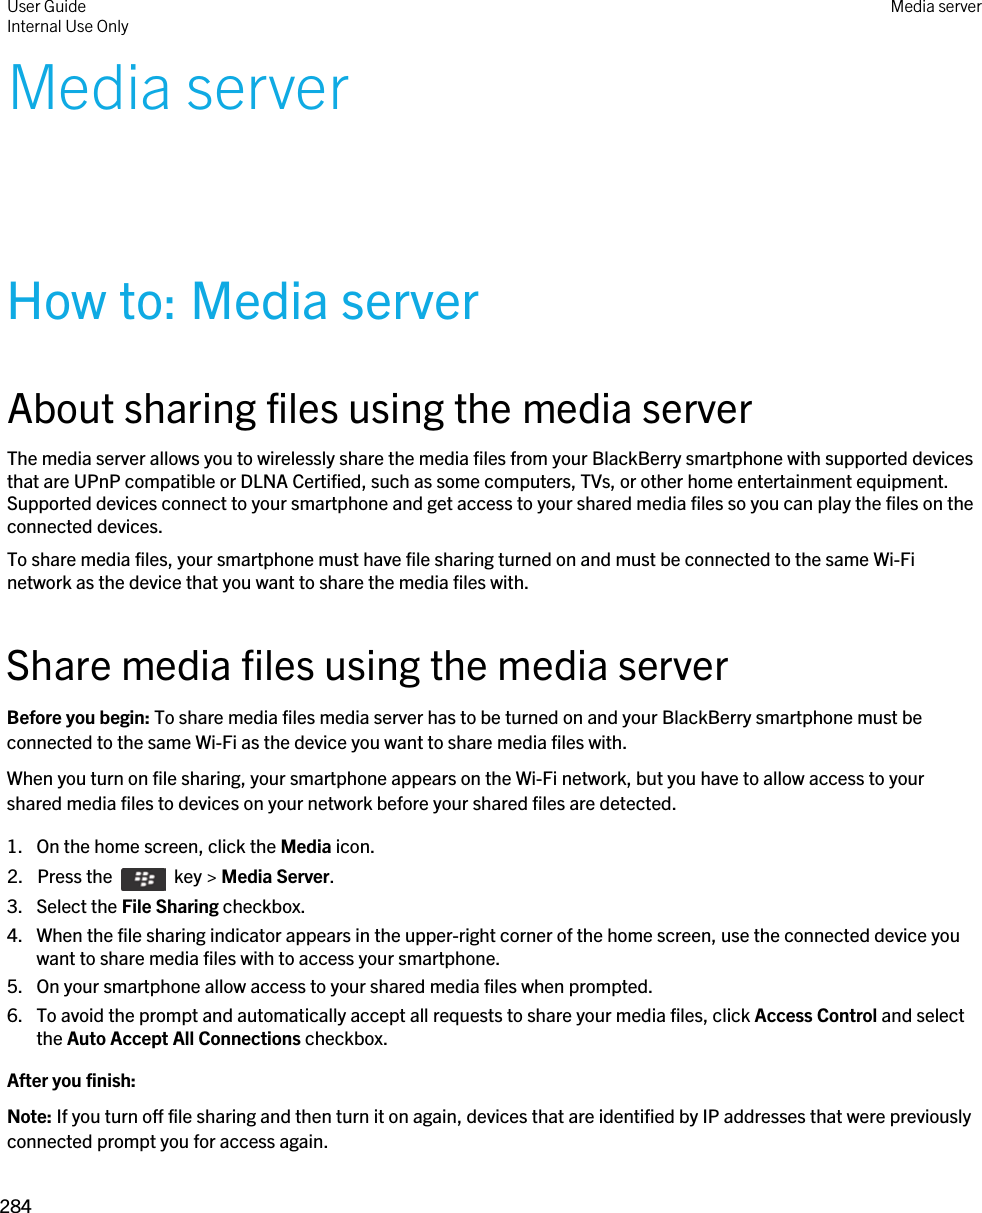 Media serverHow to: Media serverAbout sharing files using the media serverThe media server allows you to wirelessly share the media files from your BlackBerry smartphone with supported devices that are UPnP compatible or DLNA Certified, such as some computers, TVs, or other home entertainment equipment. Supported devices connect to your smartphone and get access to your shared media files so you can play the files on the connected devices.To share media files, your smartphone must have file sharing turned on and must be connected to the same Wi-Fi network as the device that you want to share the media files with.Share media files using the media serverBefore you begin: To share media files media server has to be turned on and your BlackBerry smartphone must be connected to the same Wi-Fi as the device you want to share media files with.When you turn on file sharing, your smartphone appears on the Wi-Fi network, but you have to allow access to your shared media files to devices on your network before your shared files are detected.1. On the home screen, click the Media icon.2.  Press the    key &gt; Media Server.3. Select the File Sharing checkbox.4. When the file sharing indicator appears in the upper-right corner of the home screen, use the connected device you want to share media files with to access your smartphone.5. On your smartphone allow access to your shared media files when prompted.6. To avoid the prompt and automatically accept all requests to share your media files, click Access Control and select the Auto Accept All Connections checkbox.After you finish: Note: If you turn off file sharing and then turn it on again, devices that are identified by IP addresses that were previously connected prompt you for access again.User GuideInternal Use Only Media server284 